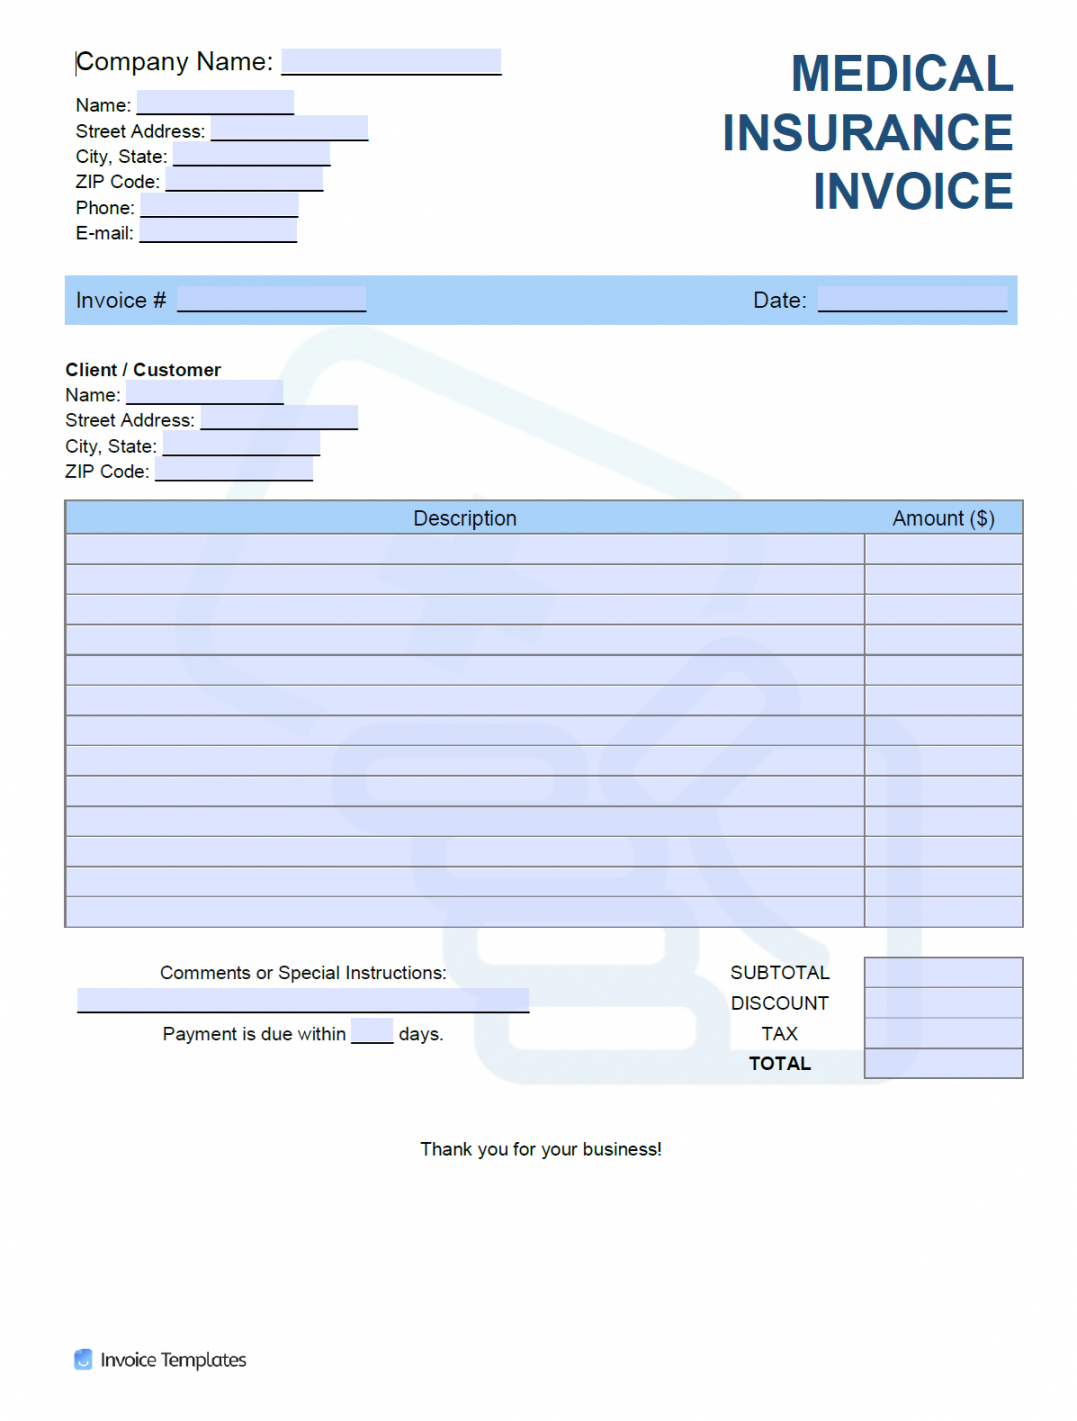 Editable Free Medical Insurance Invoice Template Pdf Word Excel Medical